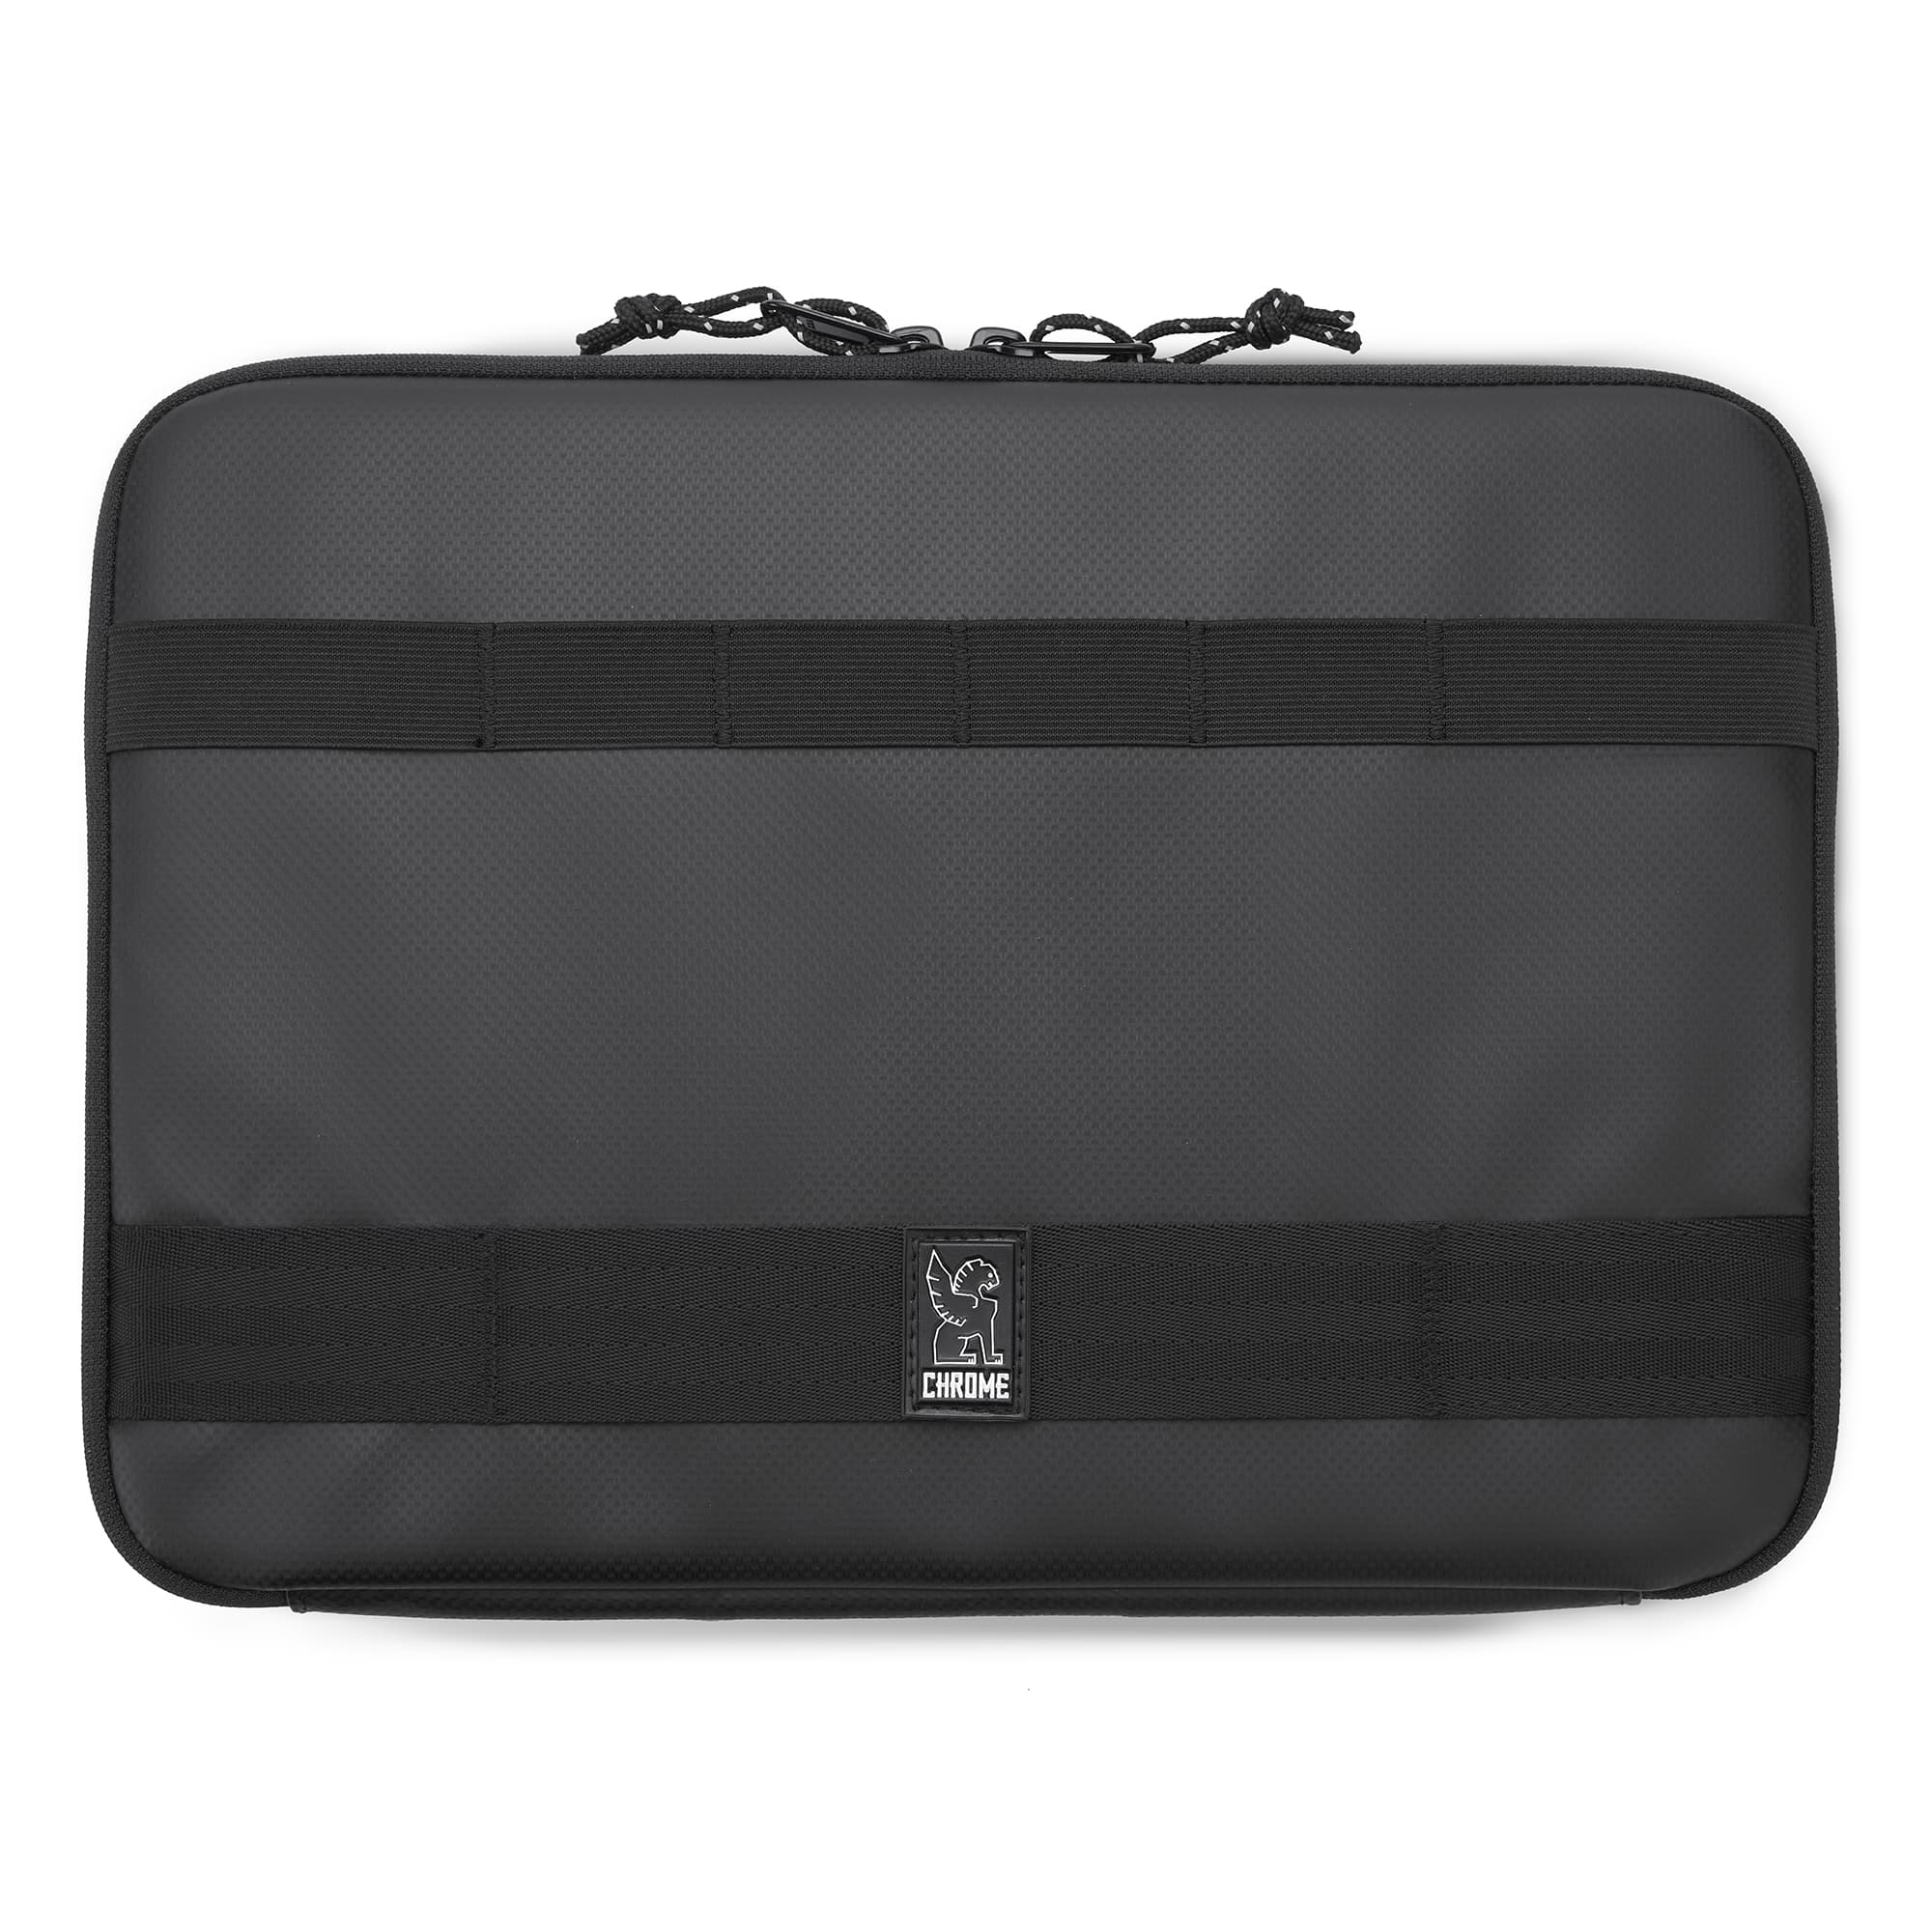 Padded laptop sleeve fits laptops 13 to 14 inches